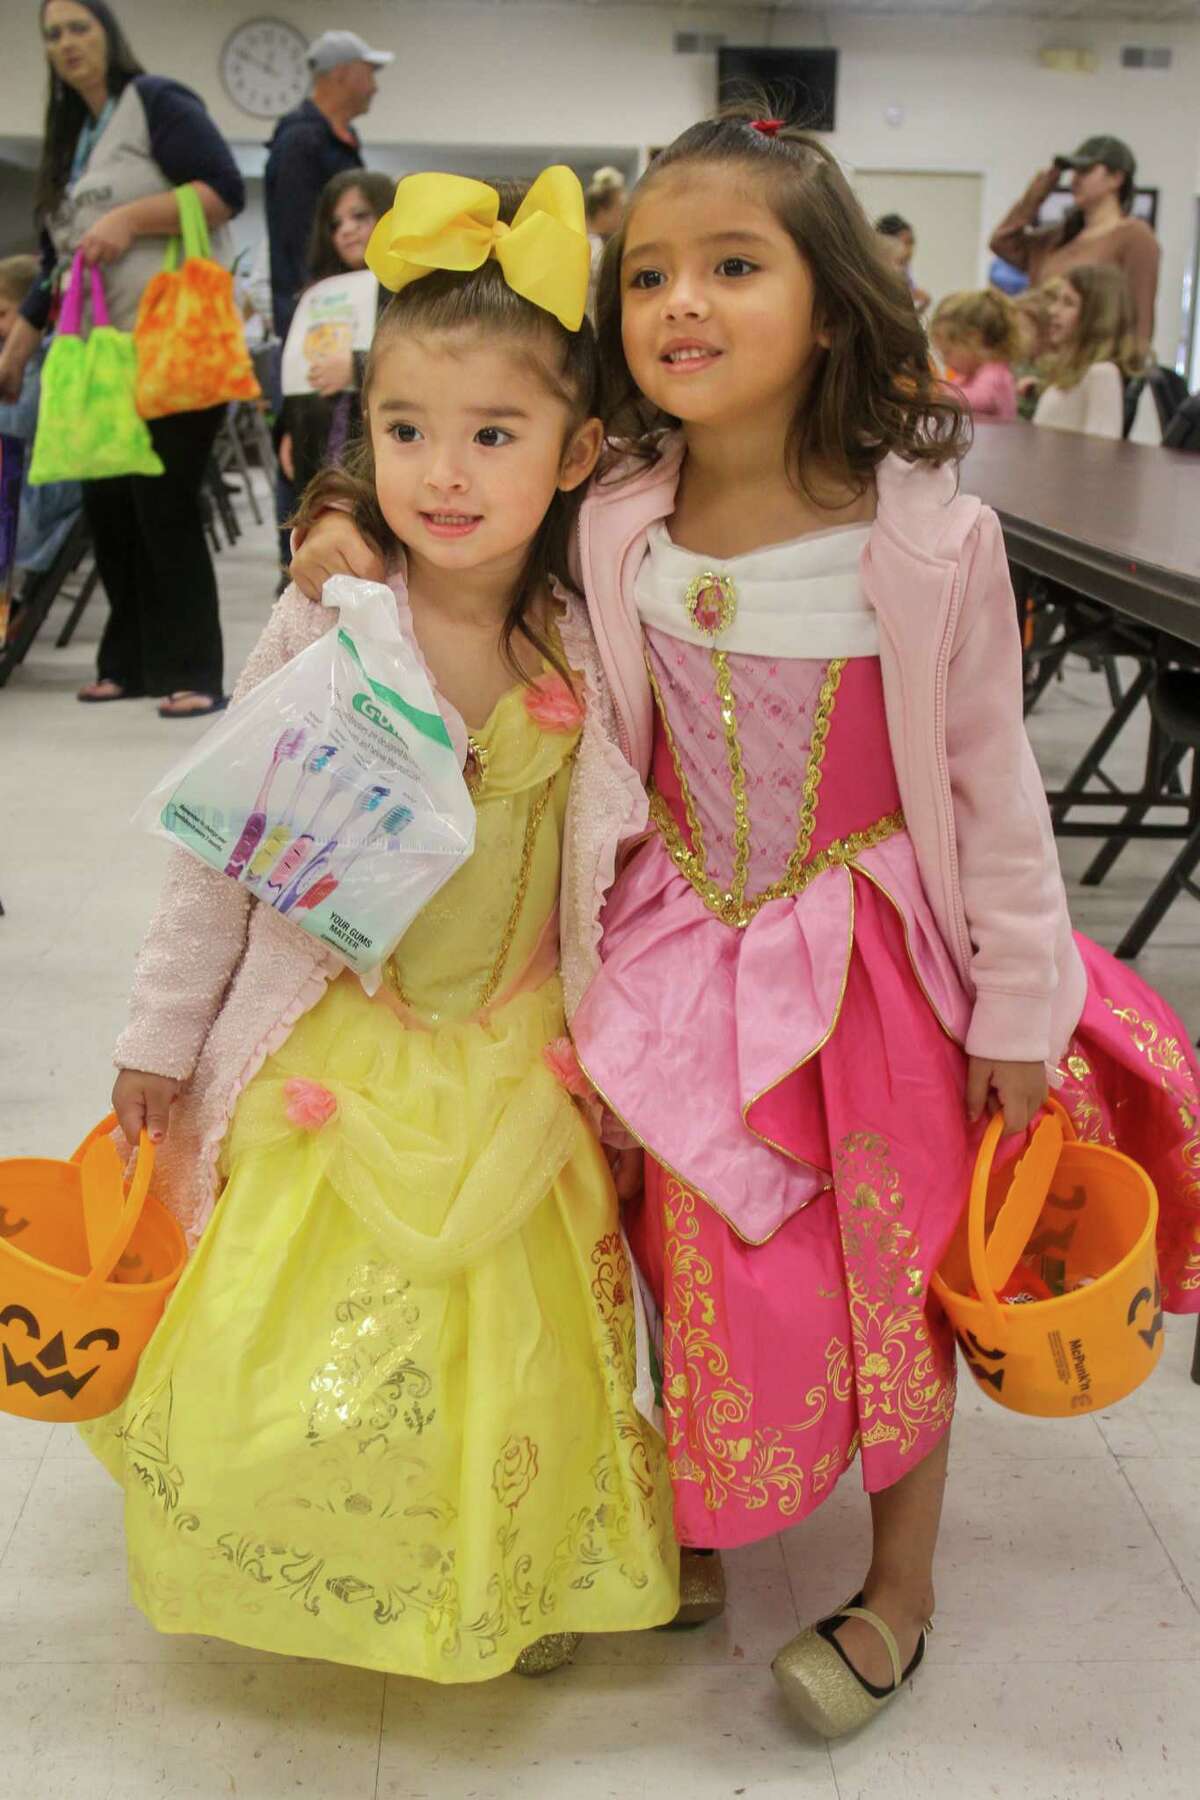 Amaya Franco, 3, left, and Avery Franco, 4, at the Conroe VFW Post 4709 Halloween Trunk or Treat on Saturday, October 29. It featured games, a photo booth, and trunk or treat.